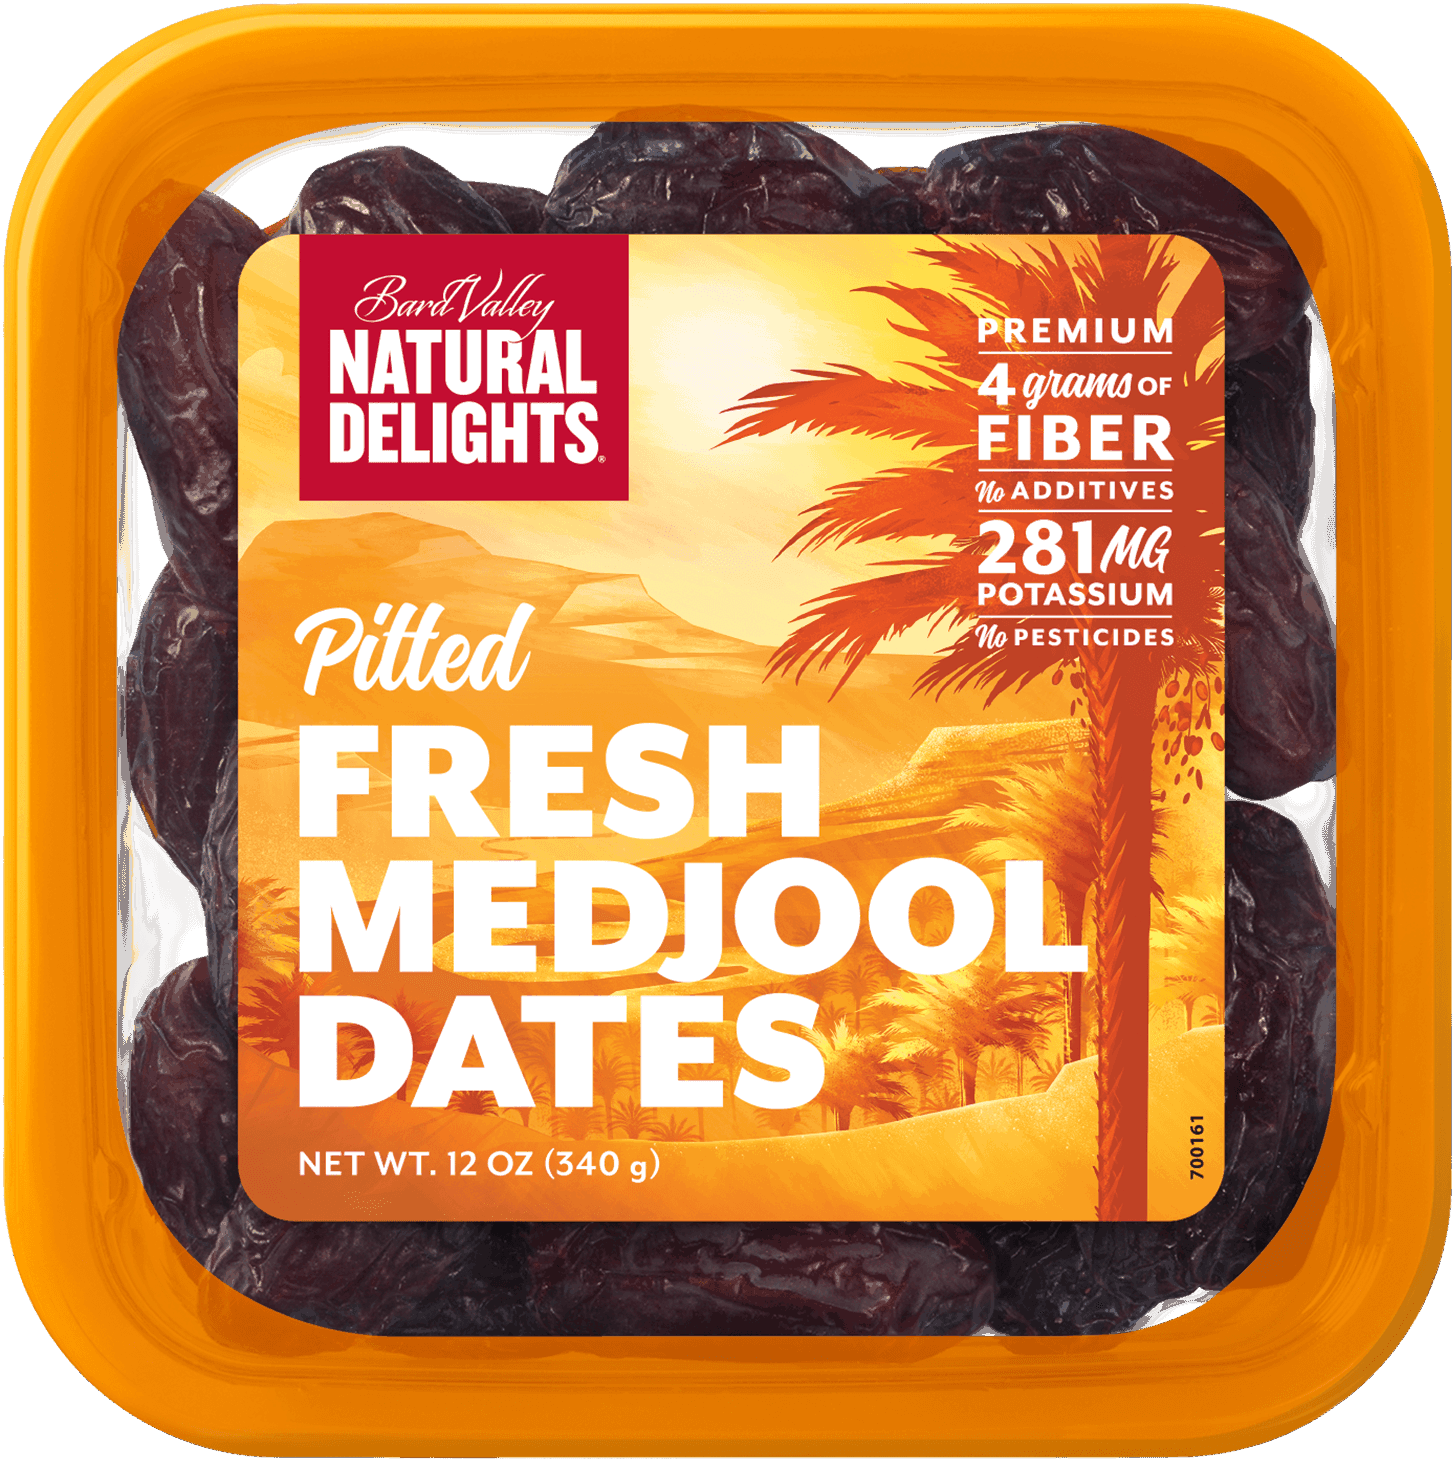 Pitted Fresh Medjool Dates Packaging